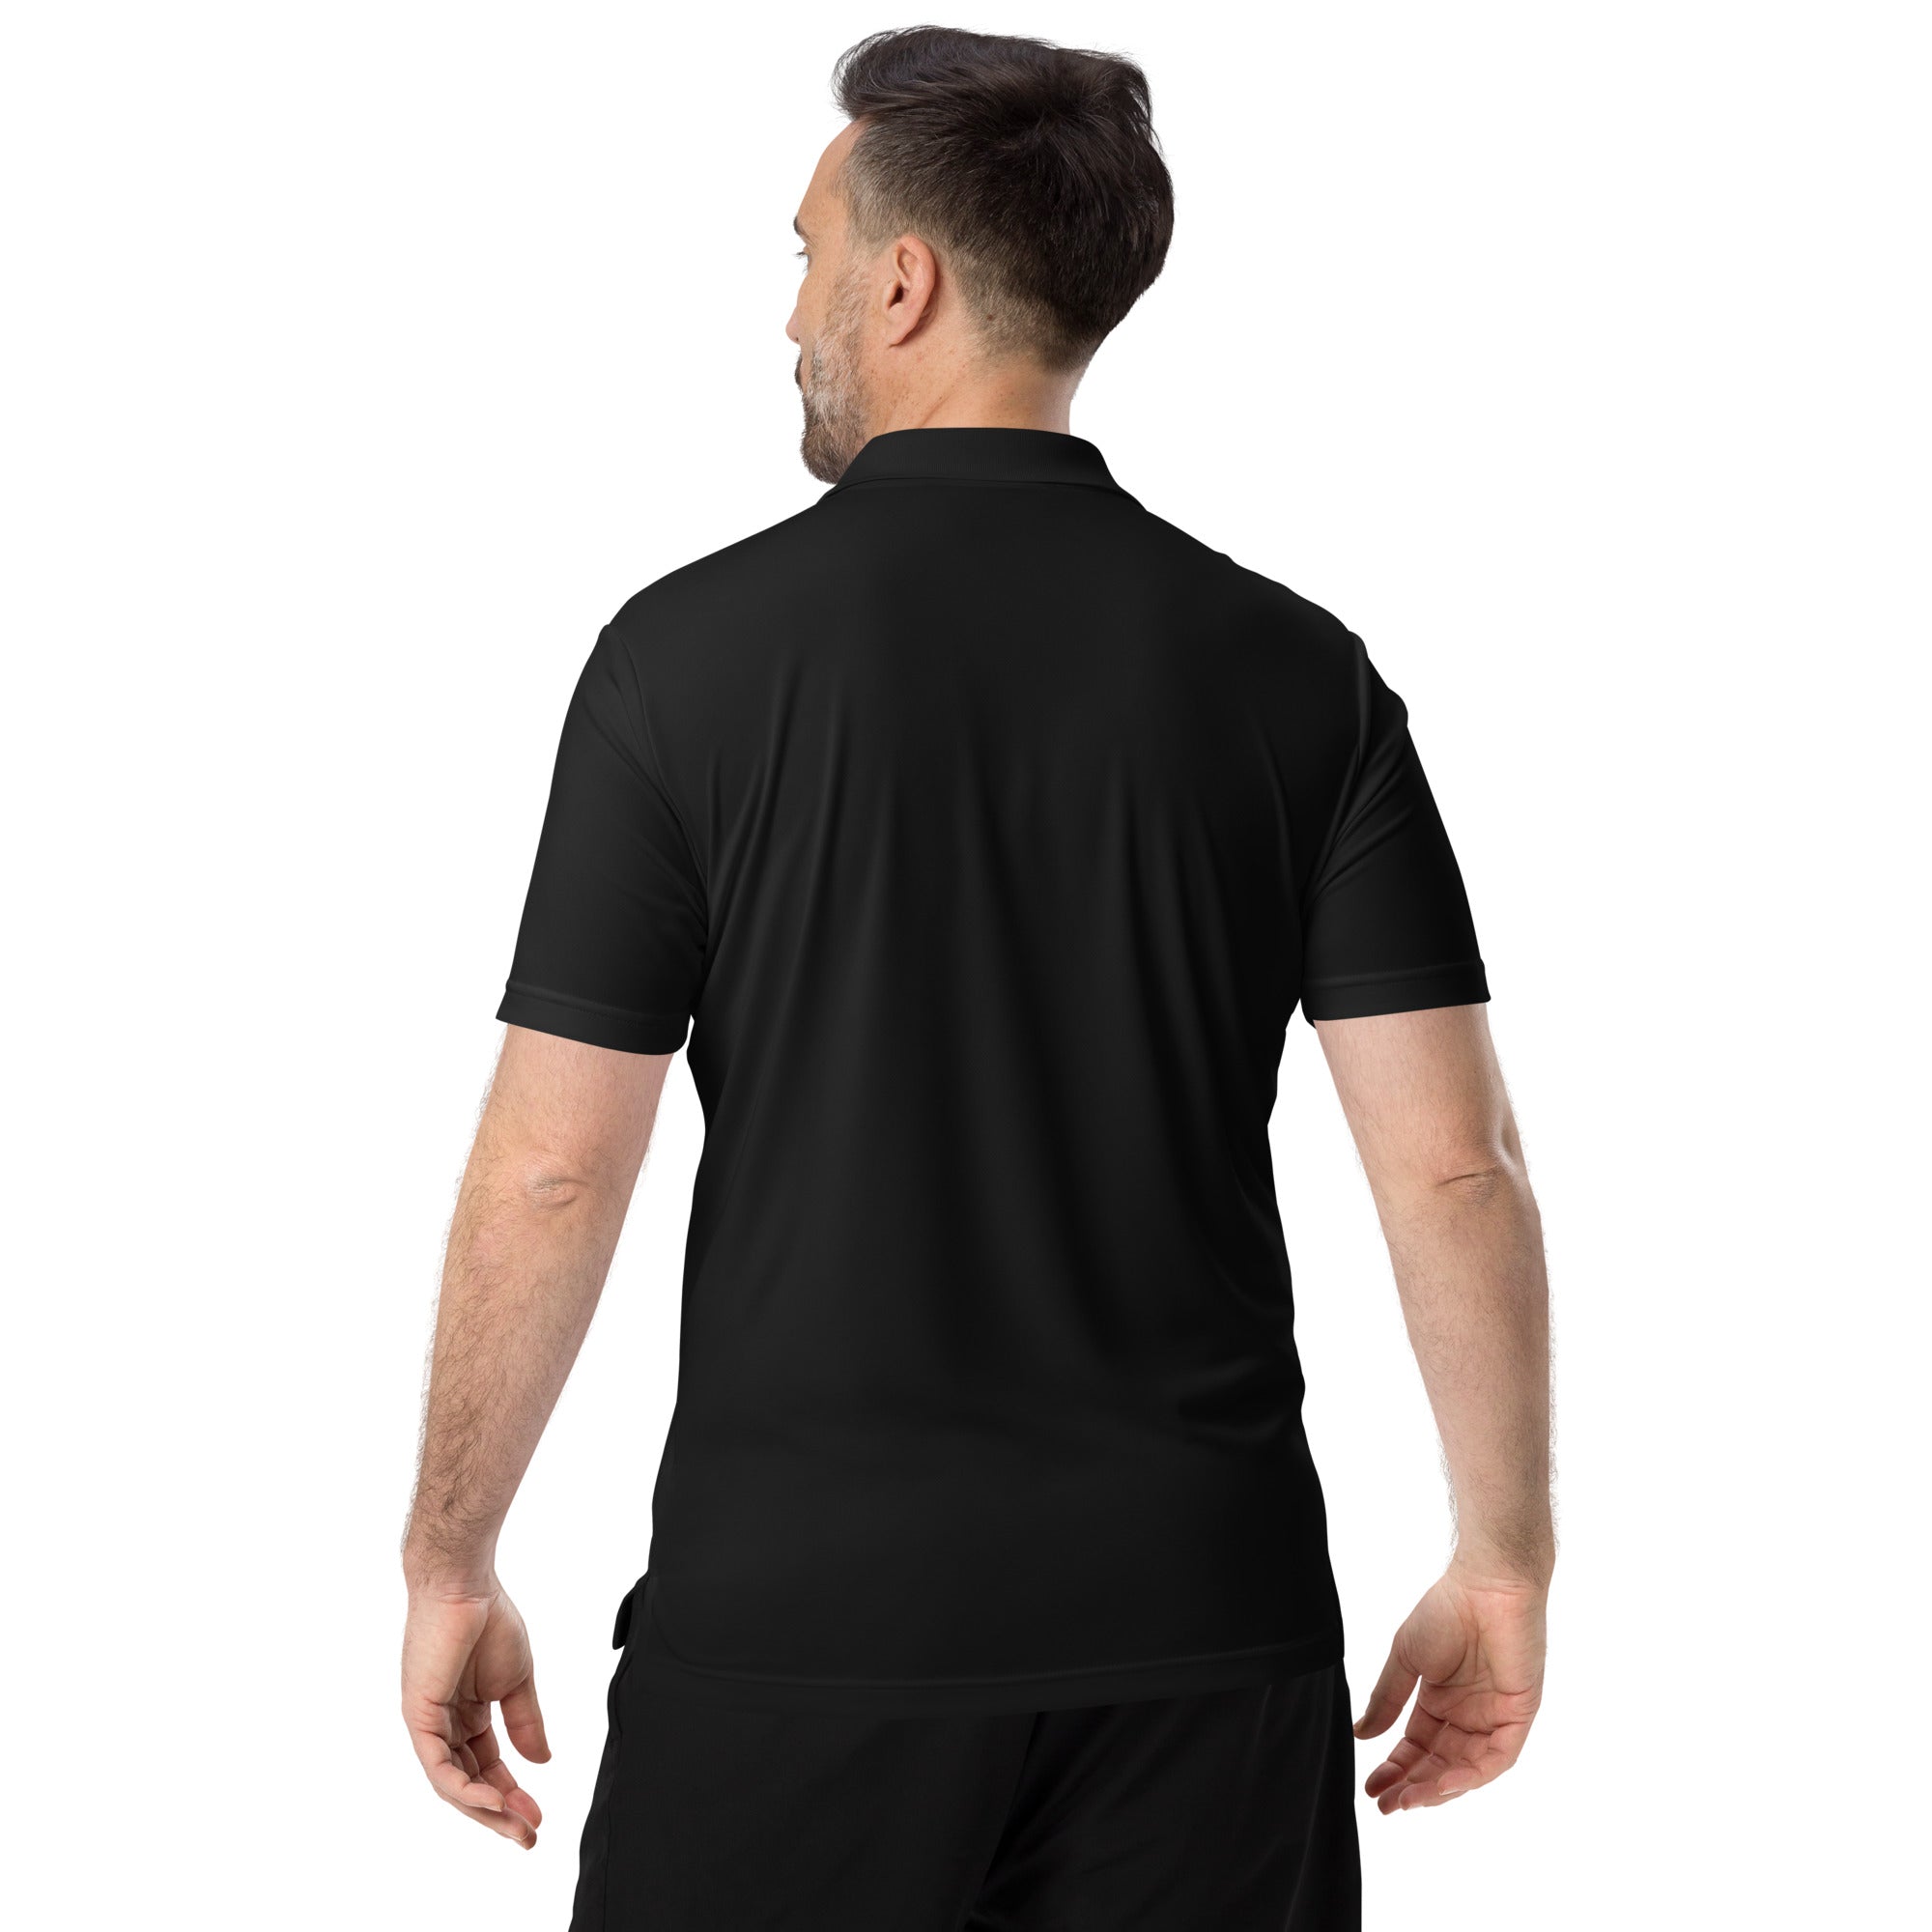 adidas performance polo yoga shirt -personal hour style - Personal Hour for Yoga and Meditations 